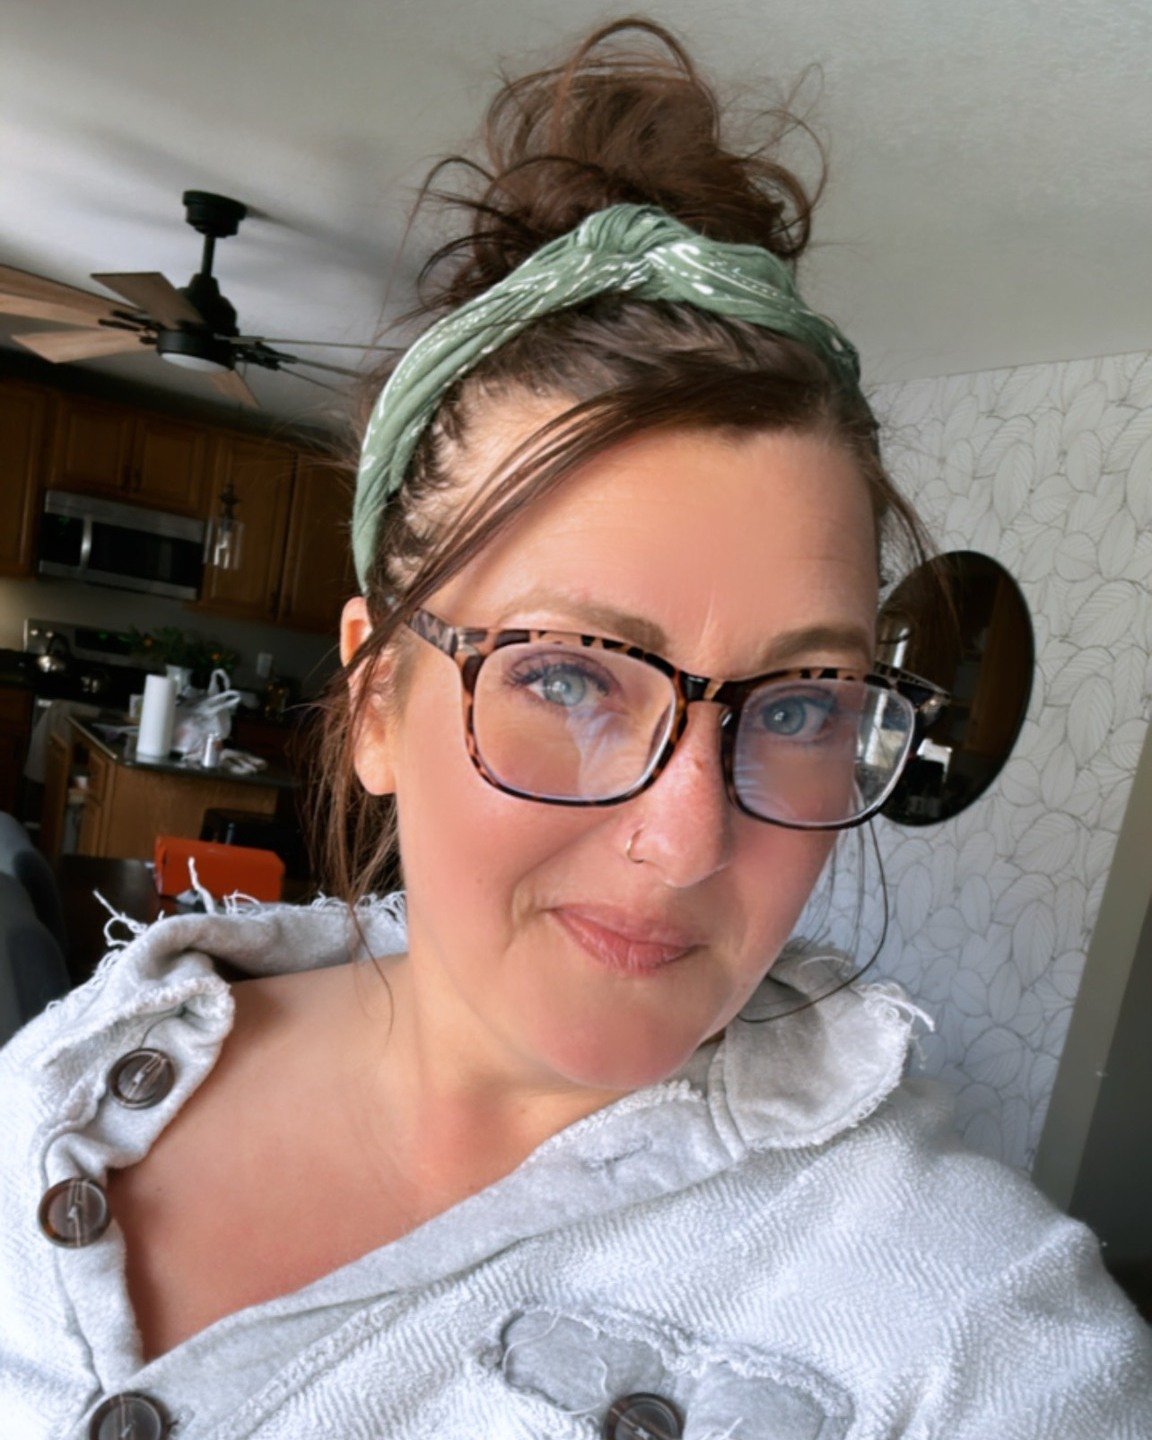 Coming to you with my messy bun and Sunday comfies to remind you that tomorrow the Success Beyond Sickness Summit is kicking off tomorrow and you can still gain access! 

This 14-day summit is packed with over 25 professional development and wellness